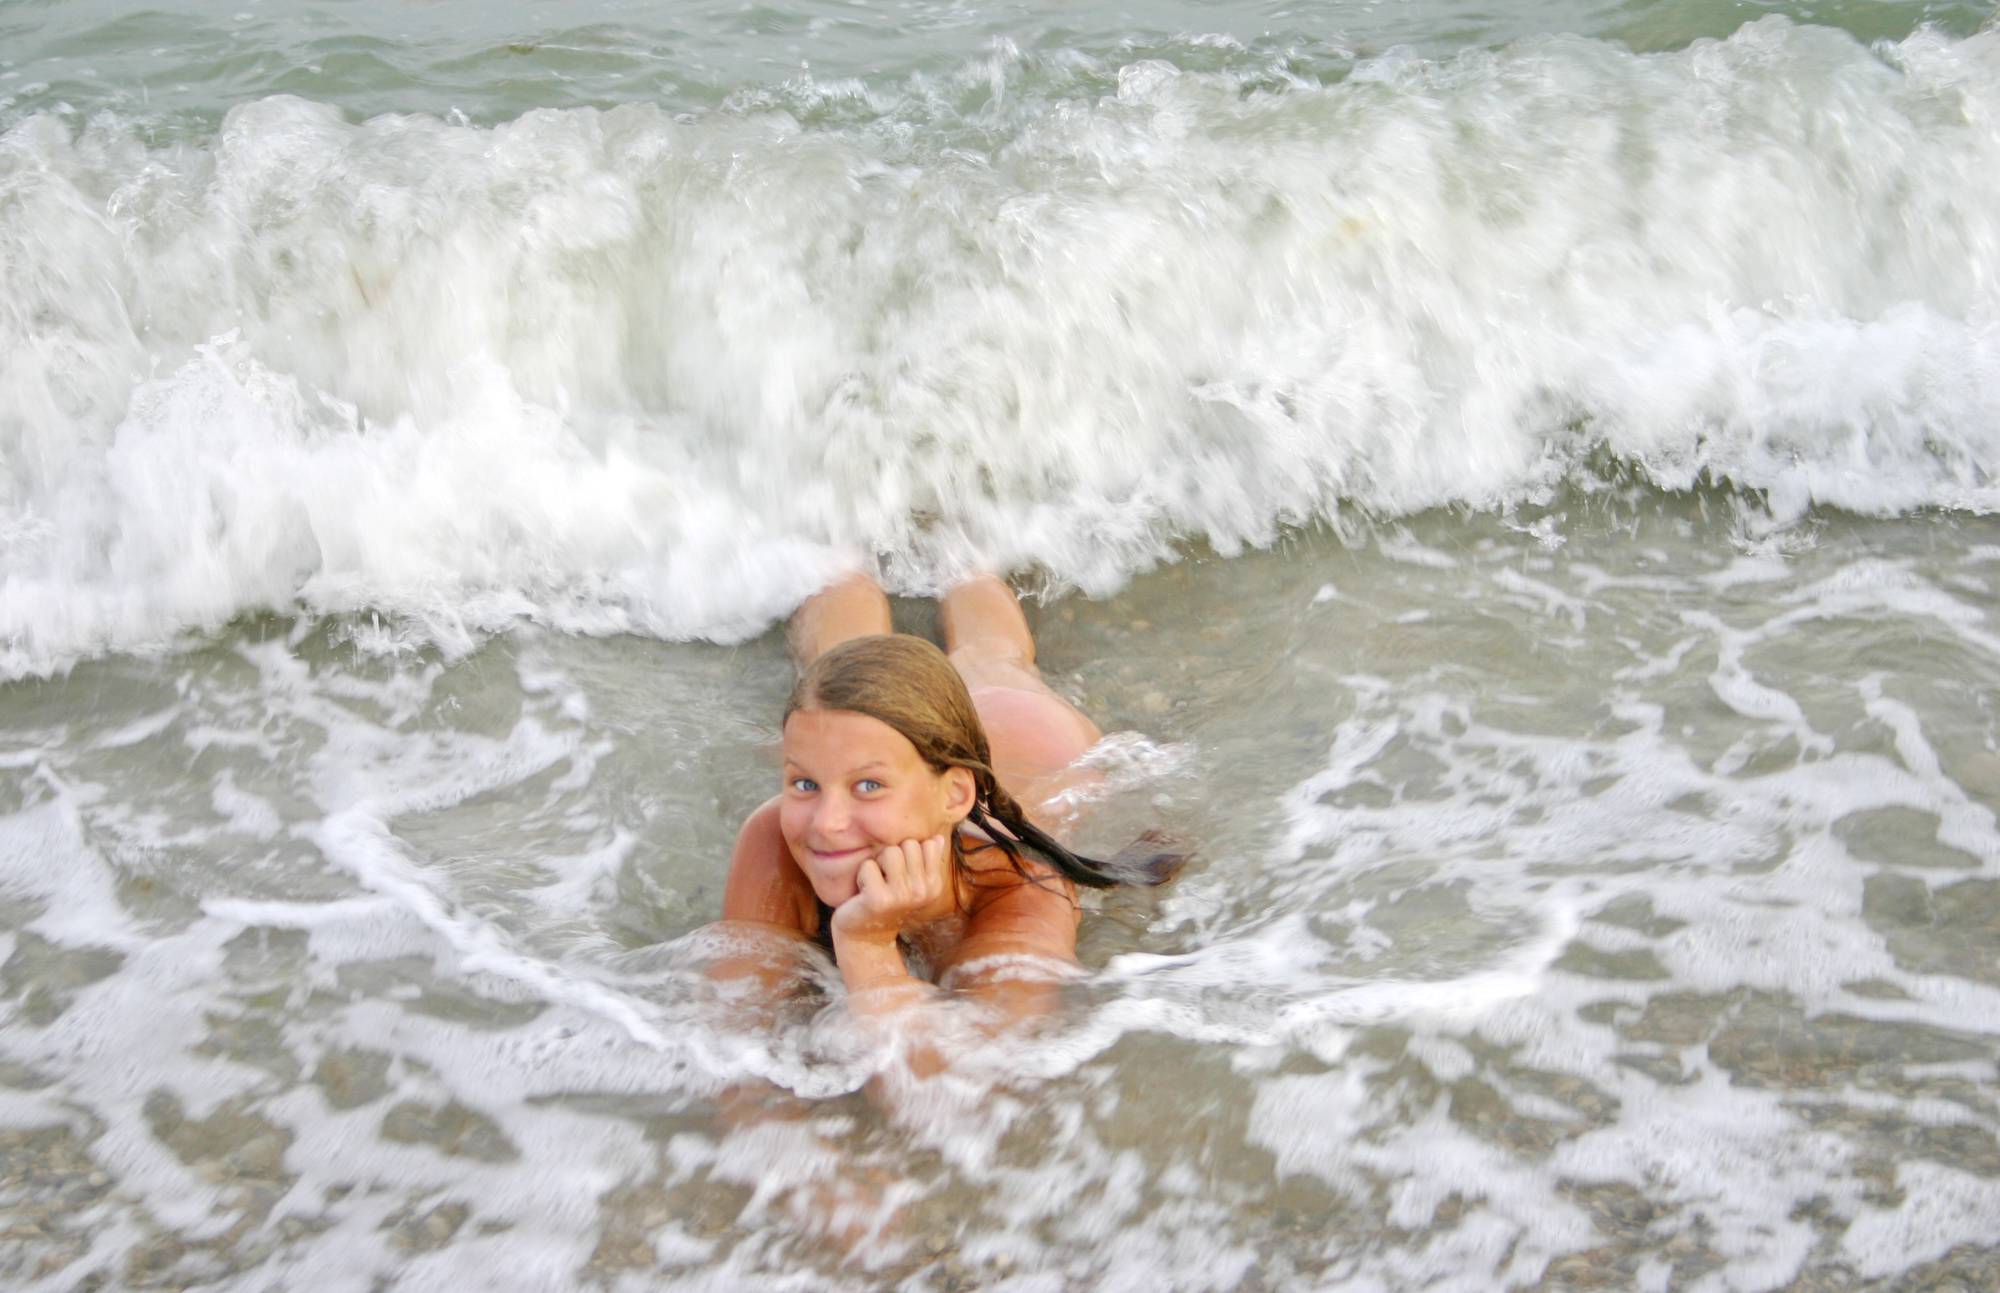 Pure Nudism Photos - Low Splashes in the Wave - 2